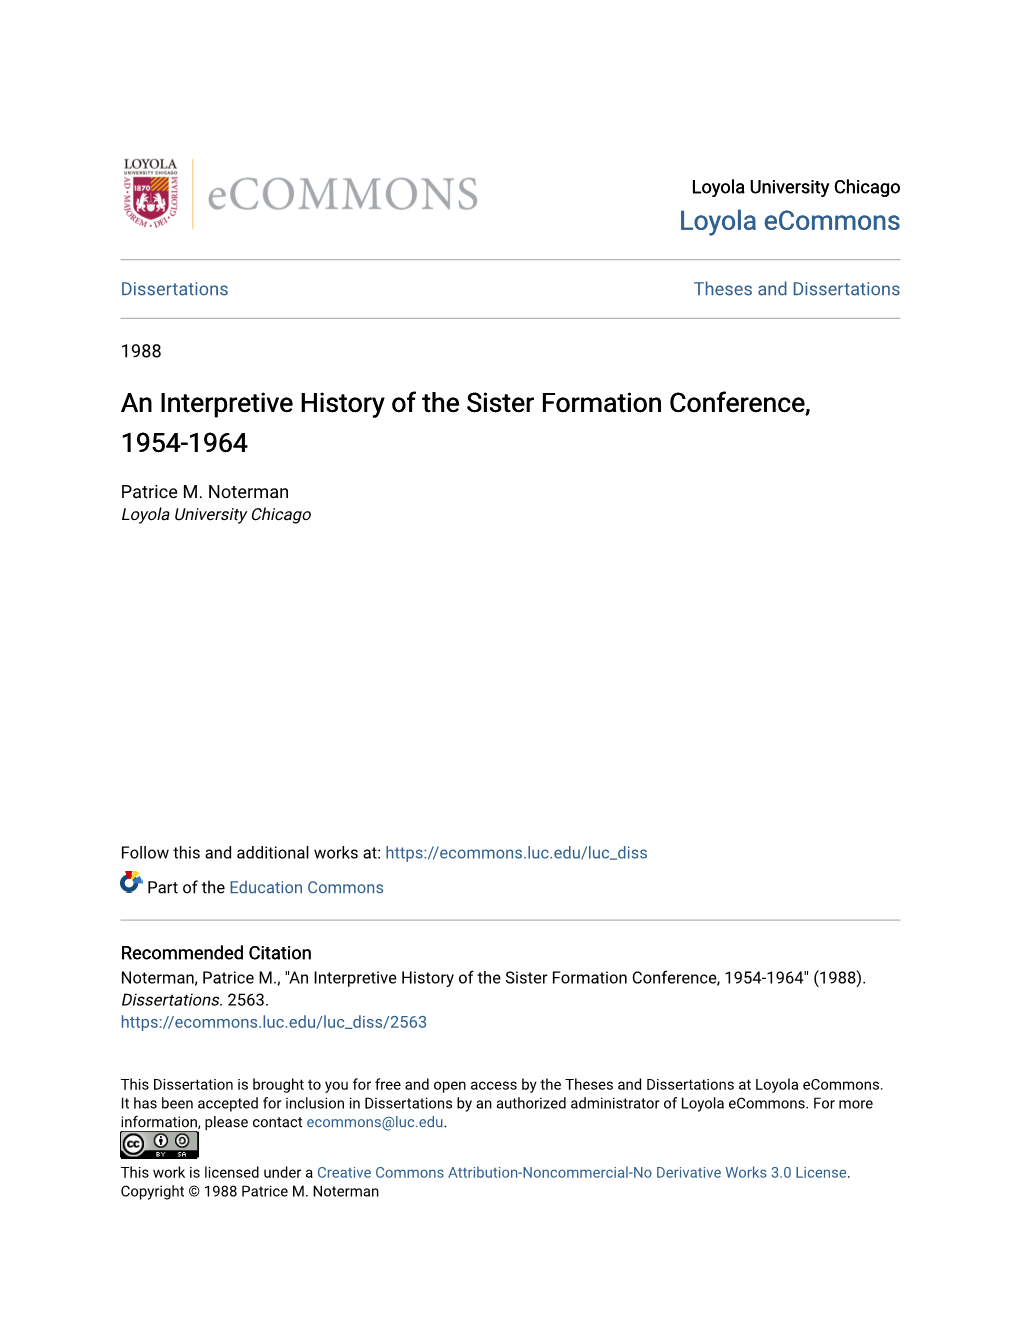 An Interpretive History of the Sister Formation Conference, 1954-1964